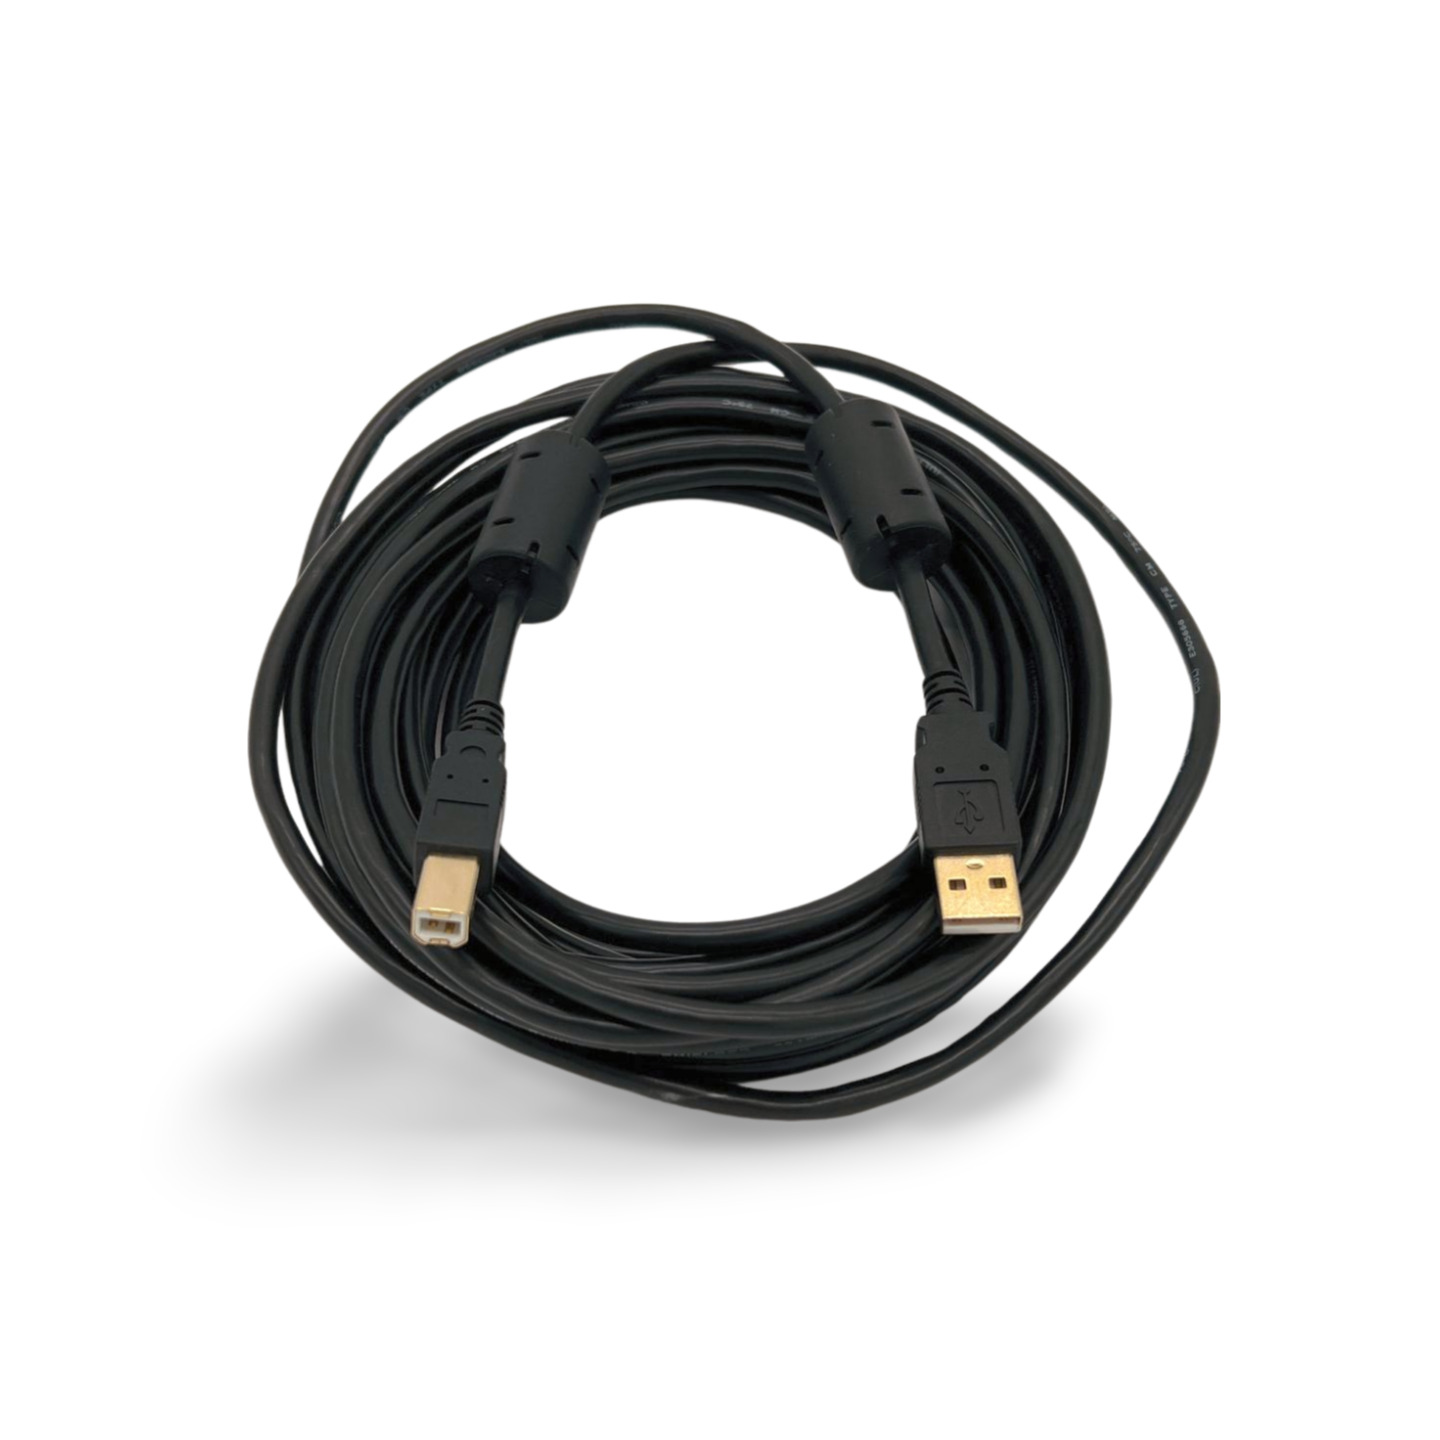 20ft USB 2.0 Computer Cable Type A Male to Type B Male - Black